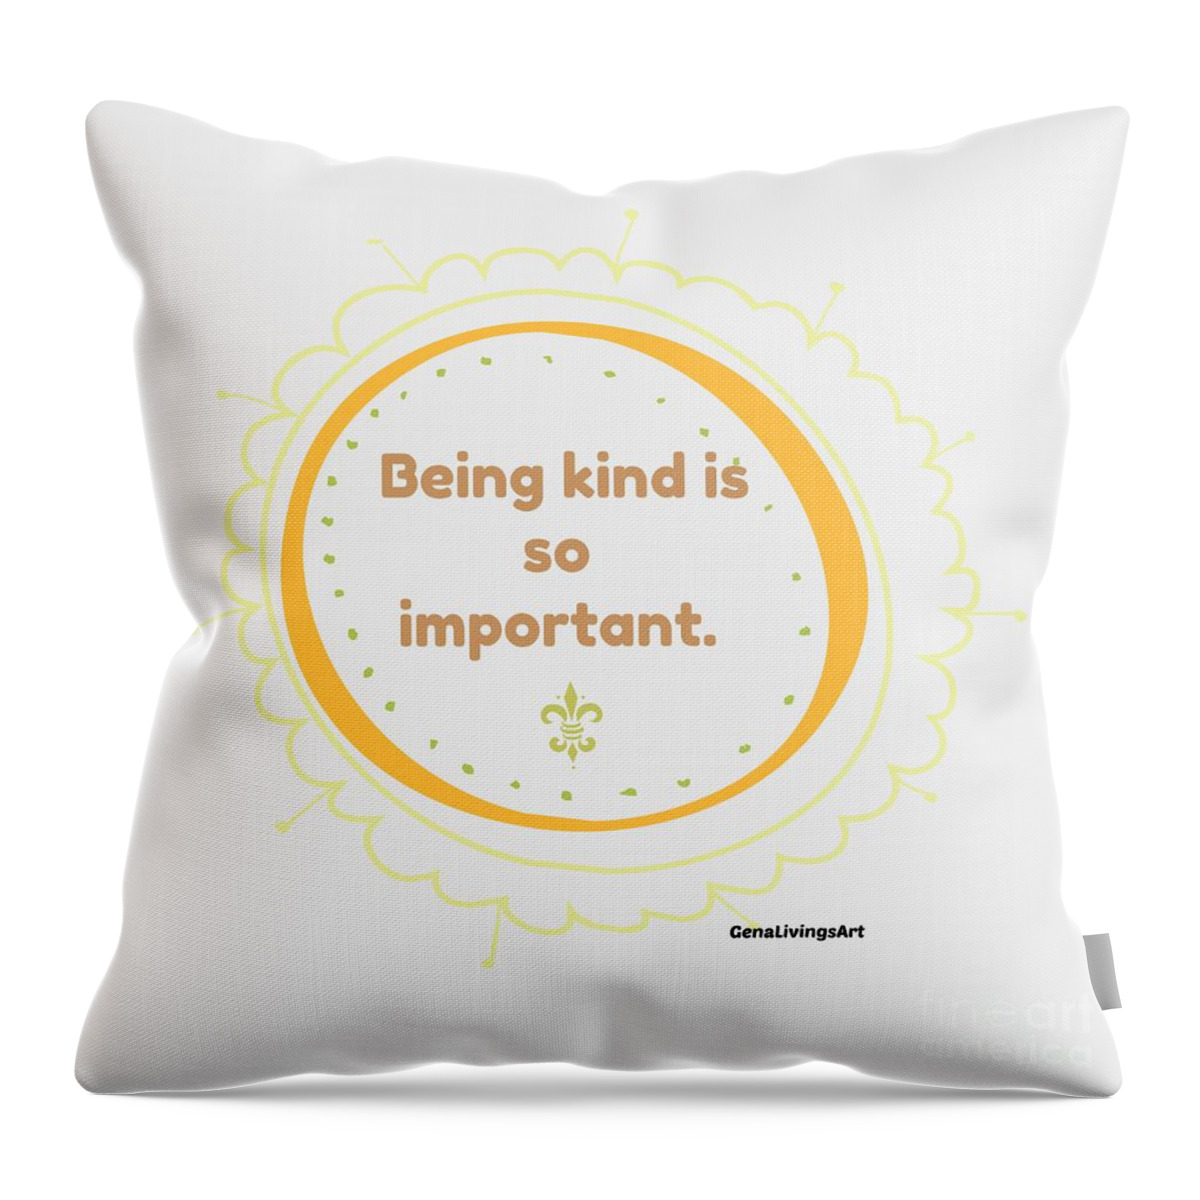  Throw Pillow featuring the digital art Being kind is so important mug by Gena Livings